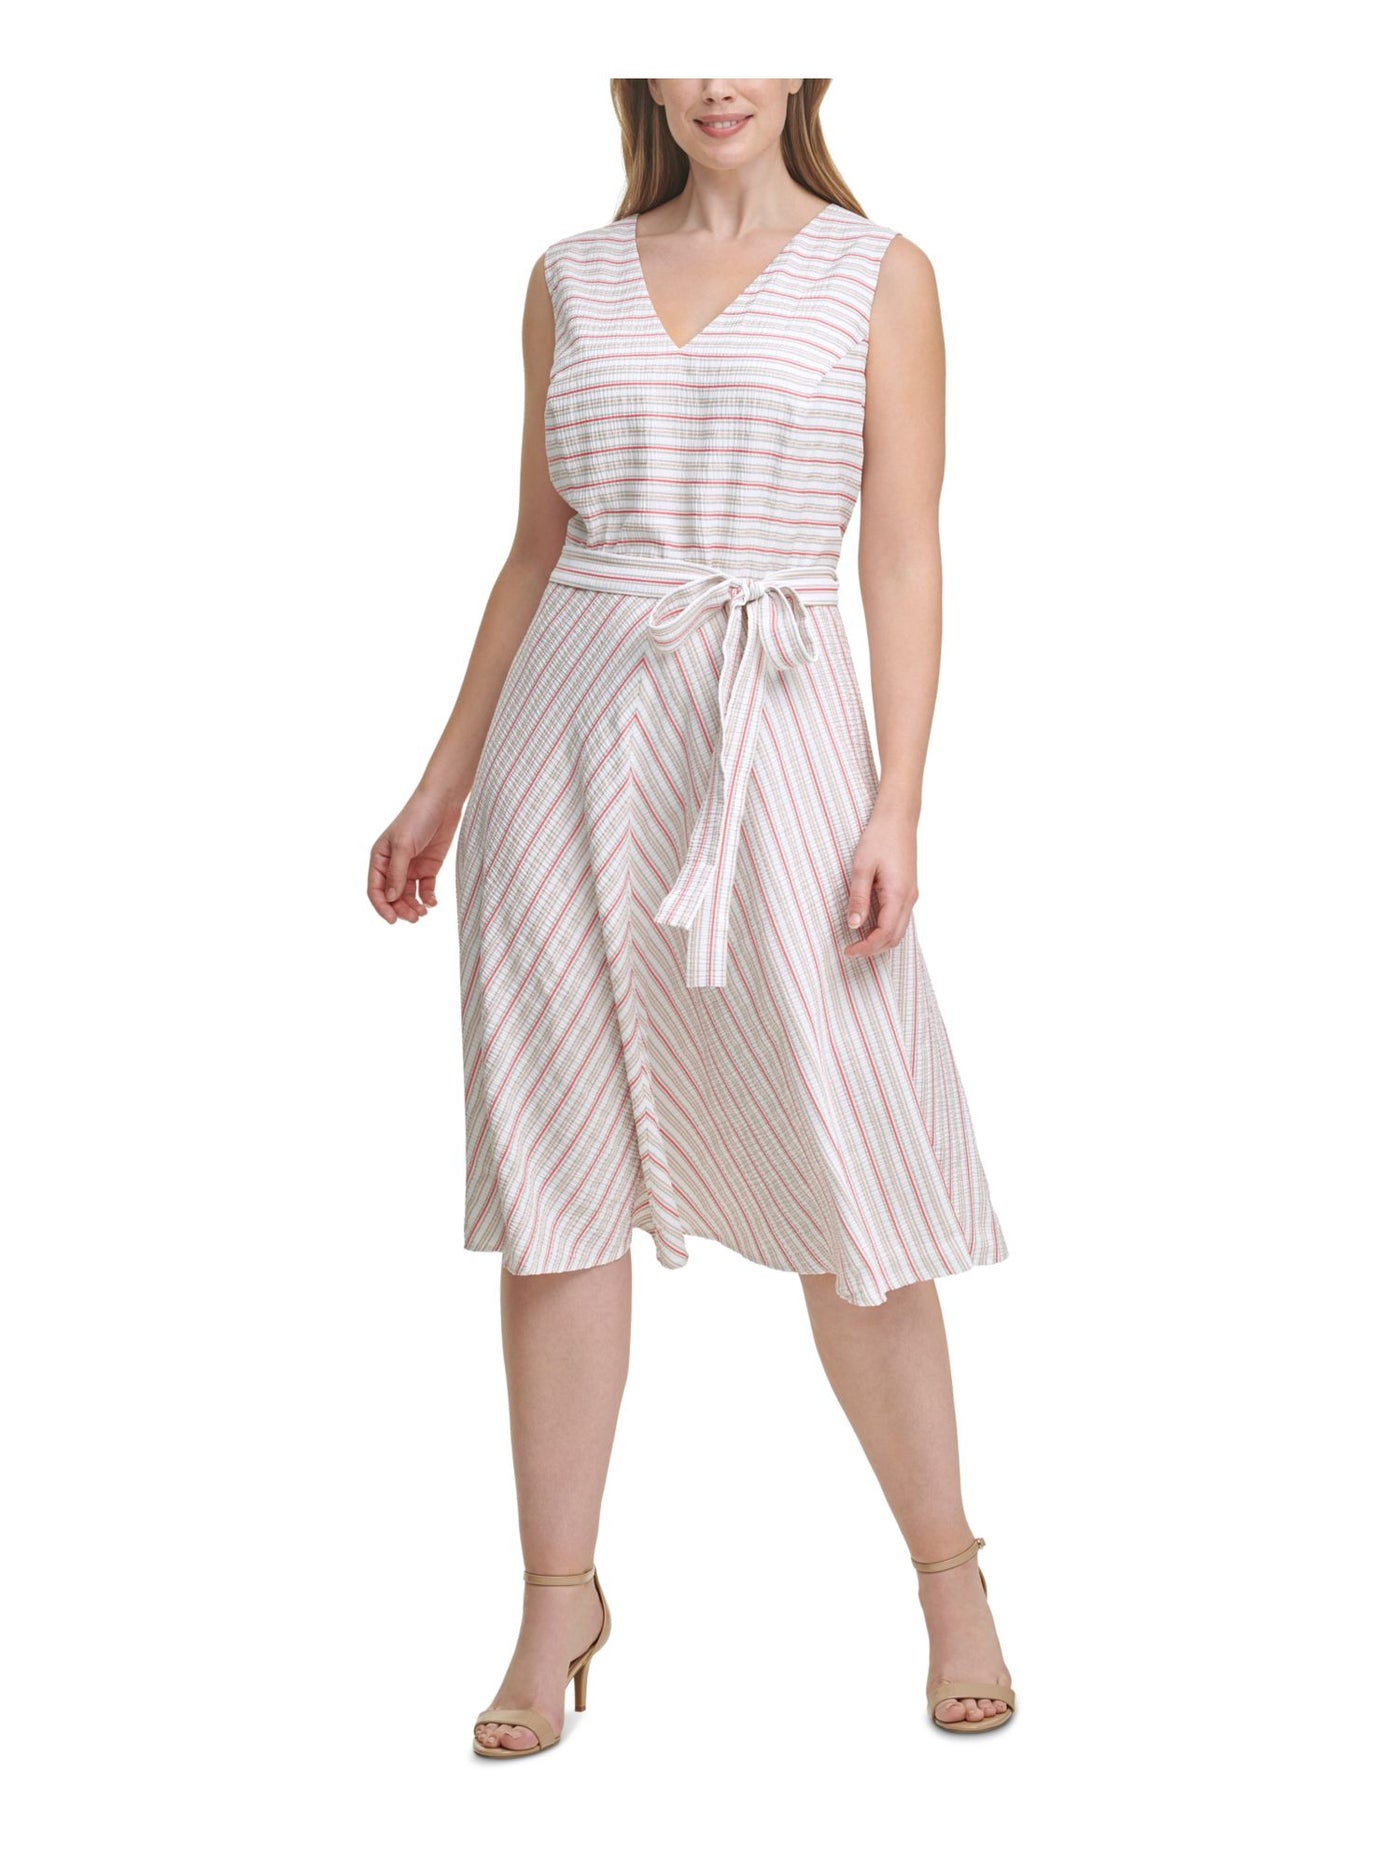 TOMMY HILFIGER Womens Ivory Zippered Tie Striped Pouf Sleeve V Neck Below The Knee Fit + Flare Dress Plus 20W